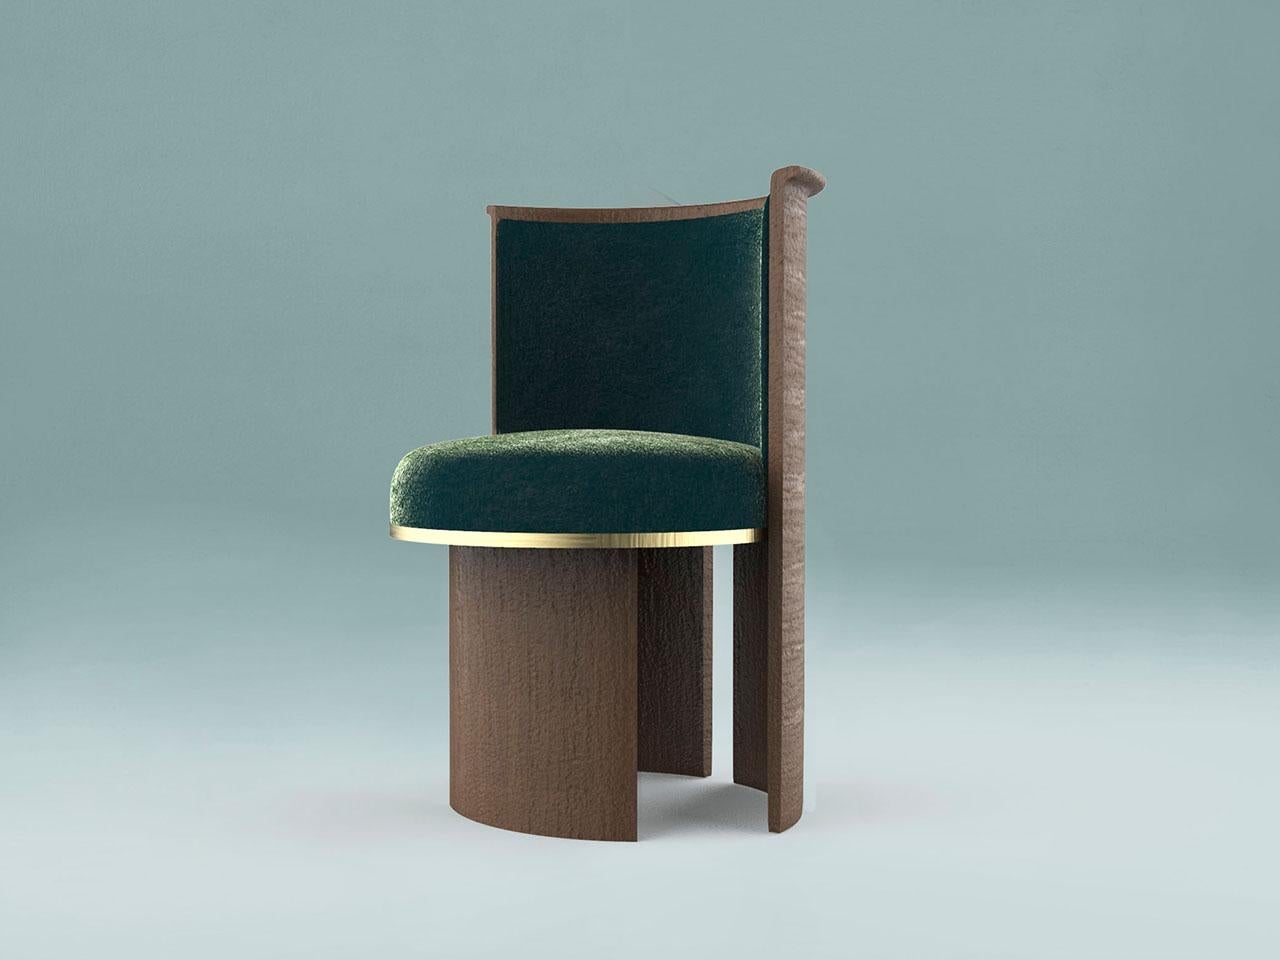 Portuguese Arco Chair by Dovain Studio